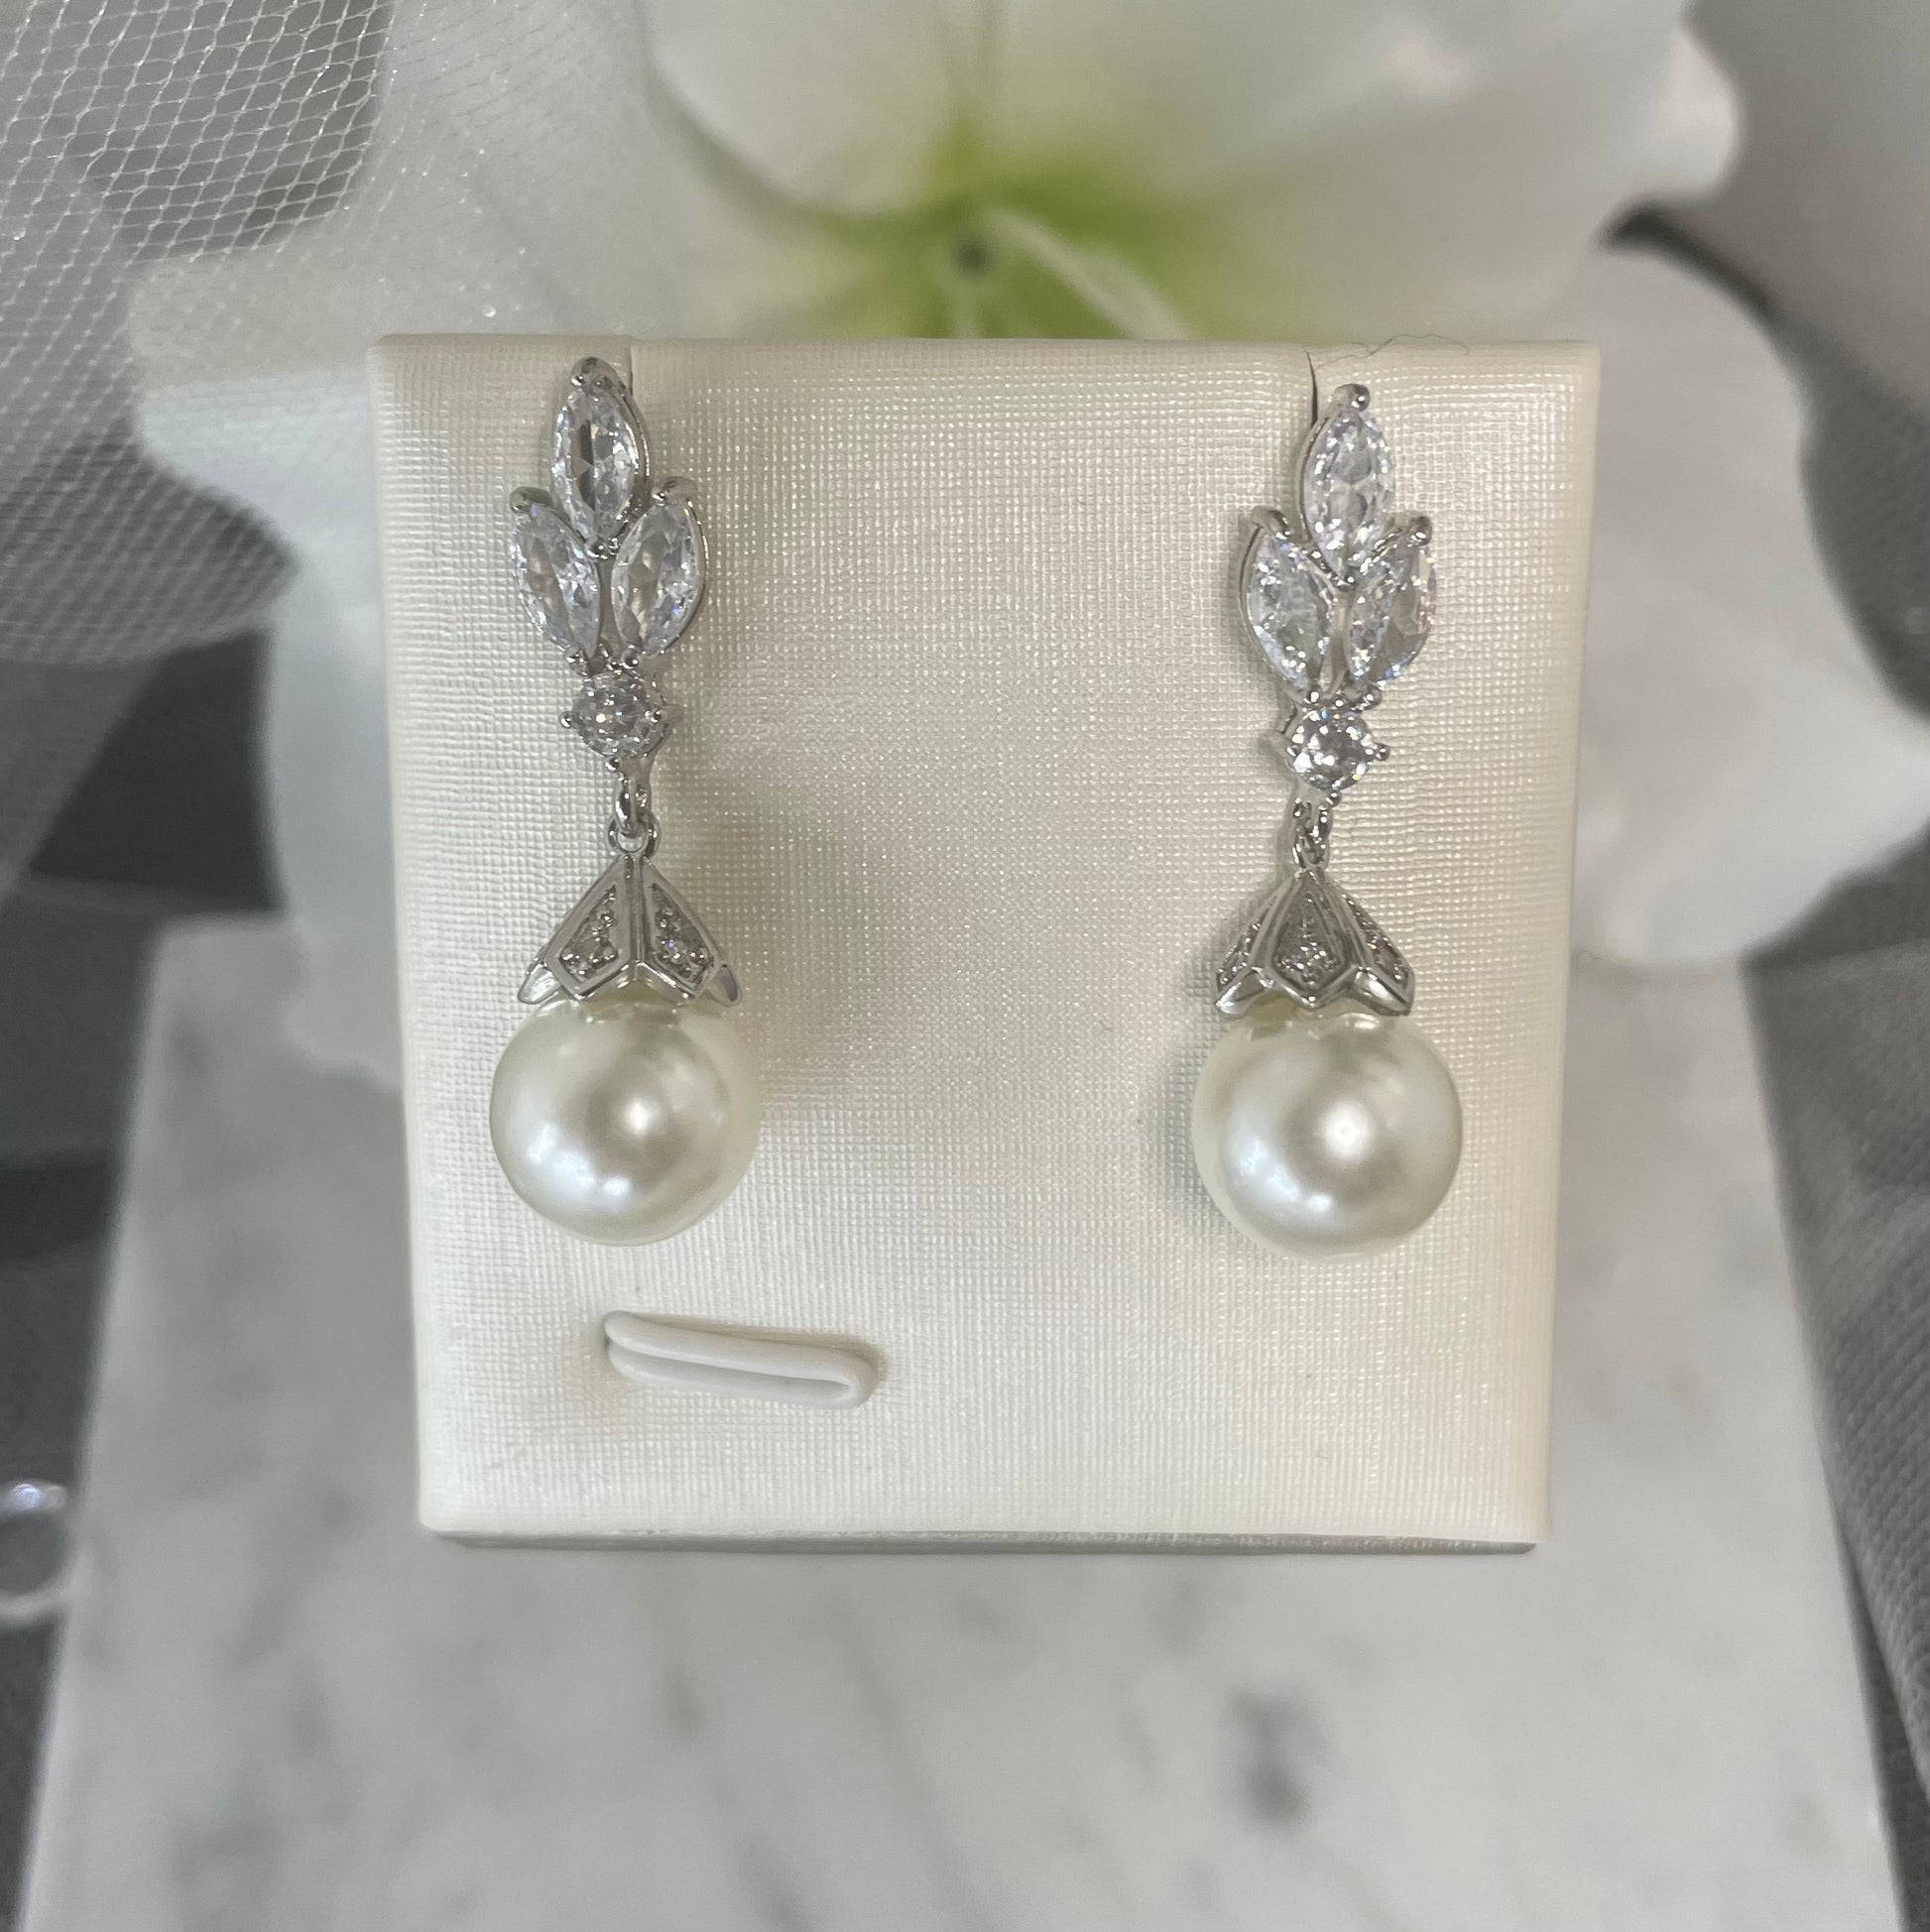 Elodie crystal pearl earrings with three leaf-like crystal design and a classic pearl drop in a secure claw setting, perfect for bridal elegance.